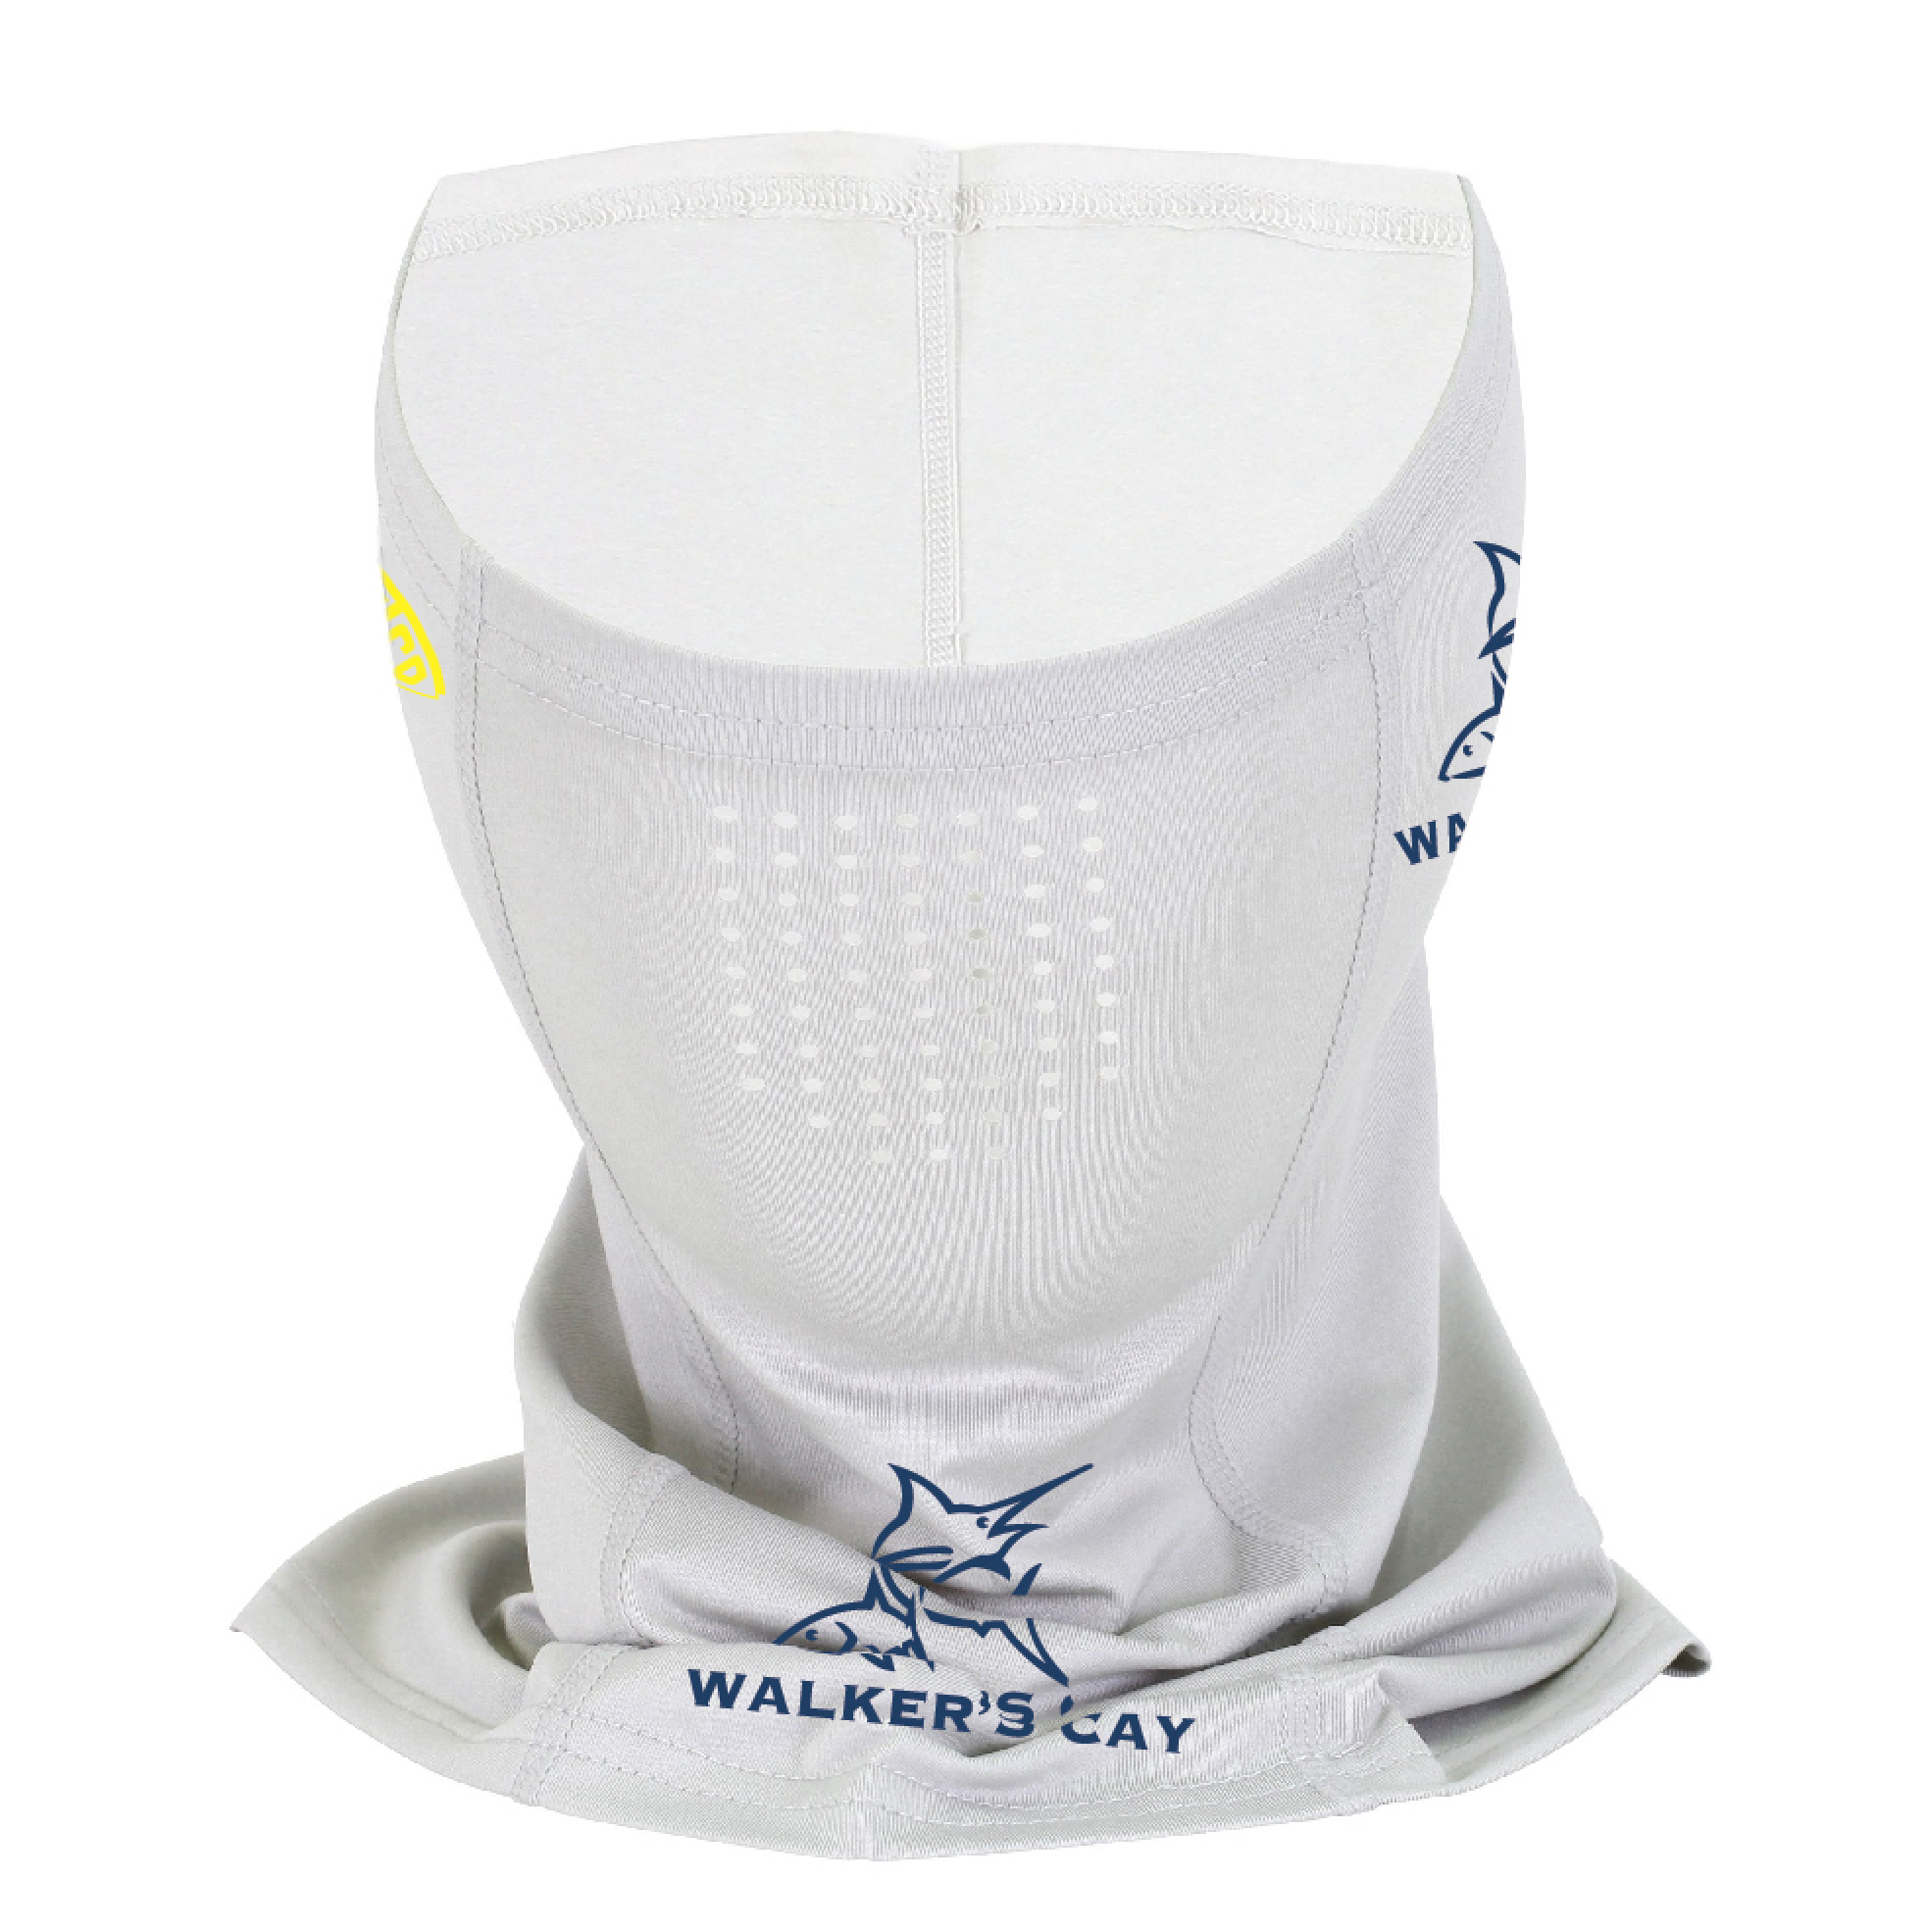 Walker's Cay - Aftco Solido Sun Mask